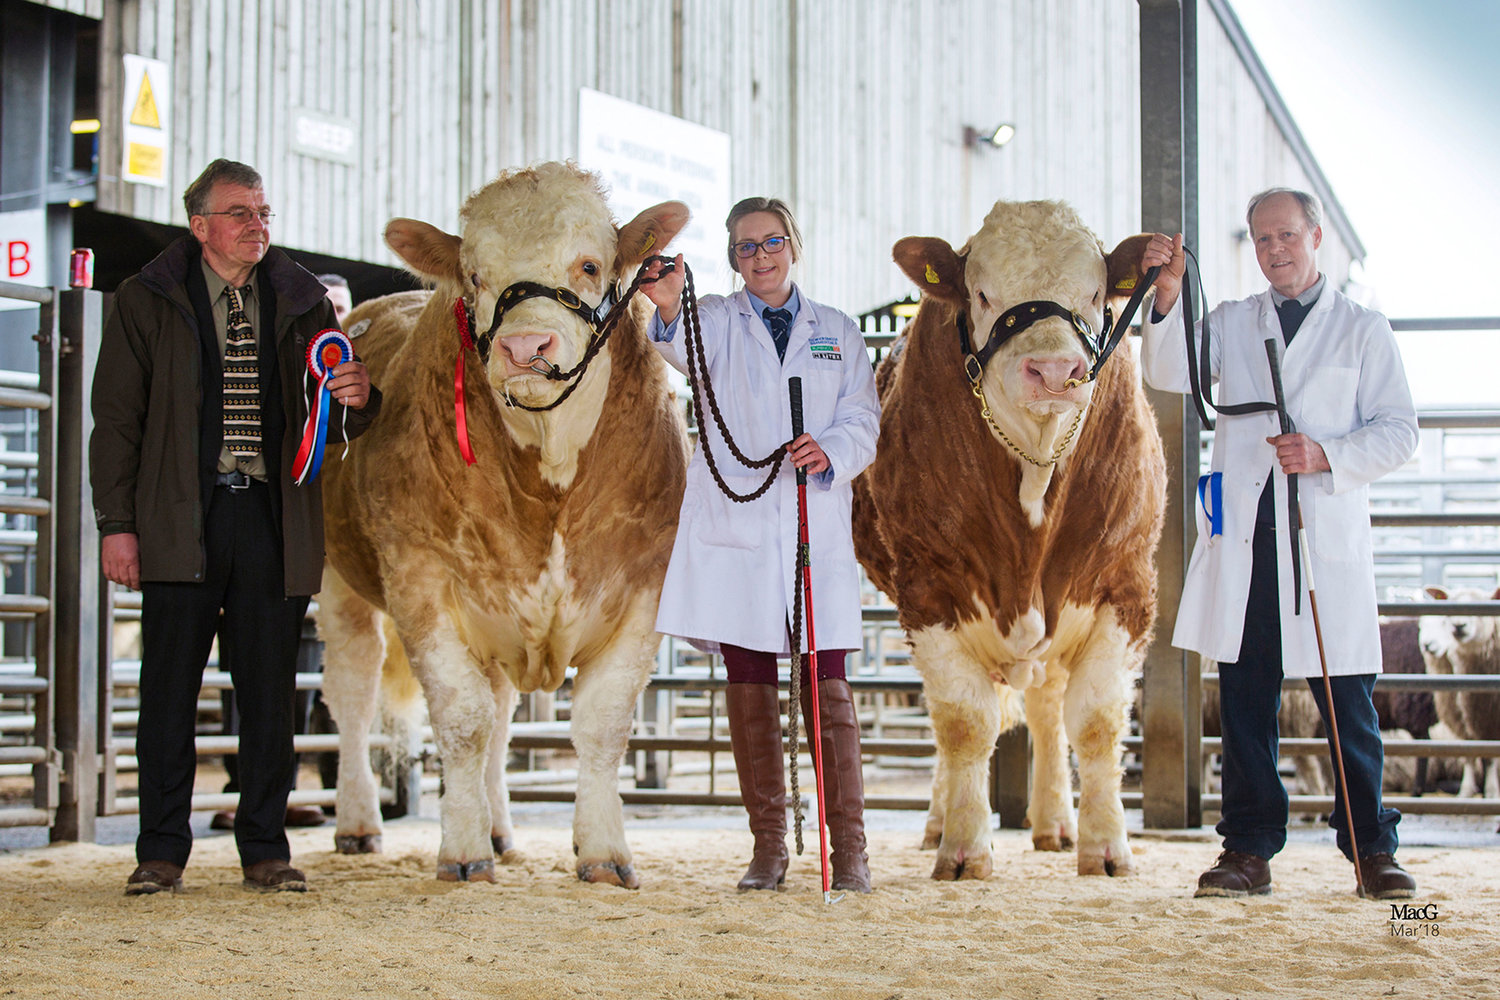 Pictured on the left is the Male & Overall Champion Storersmith Heart-Throb 16 and on the right is the Reserve Male Champion Grangewood Heston 16